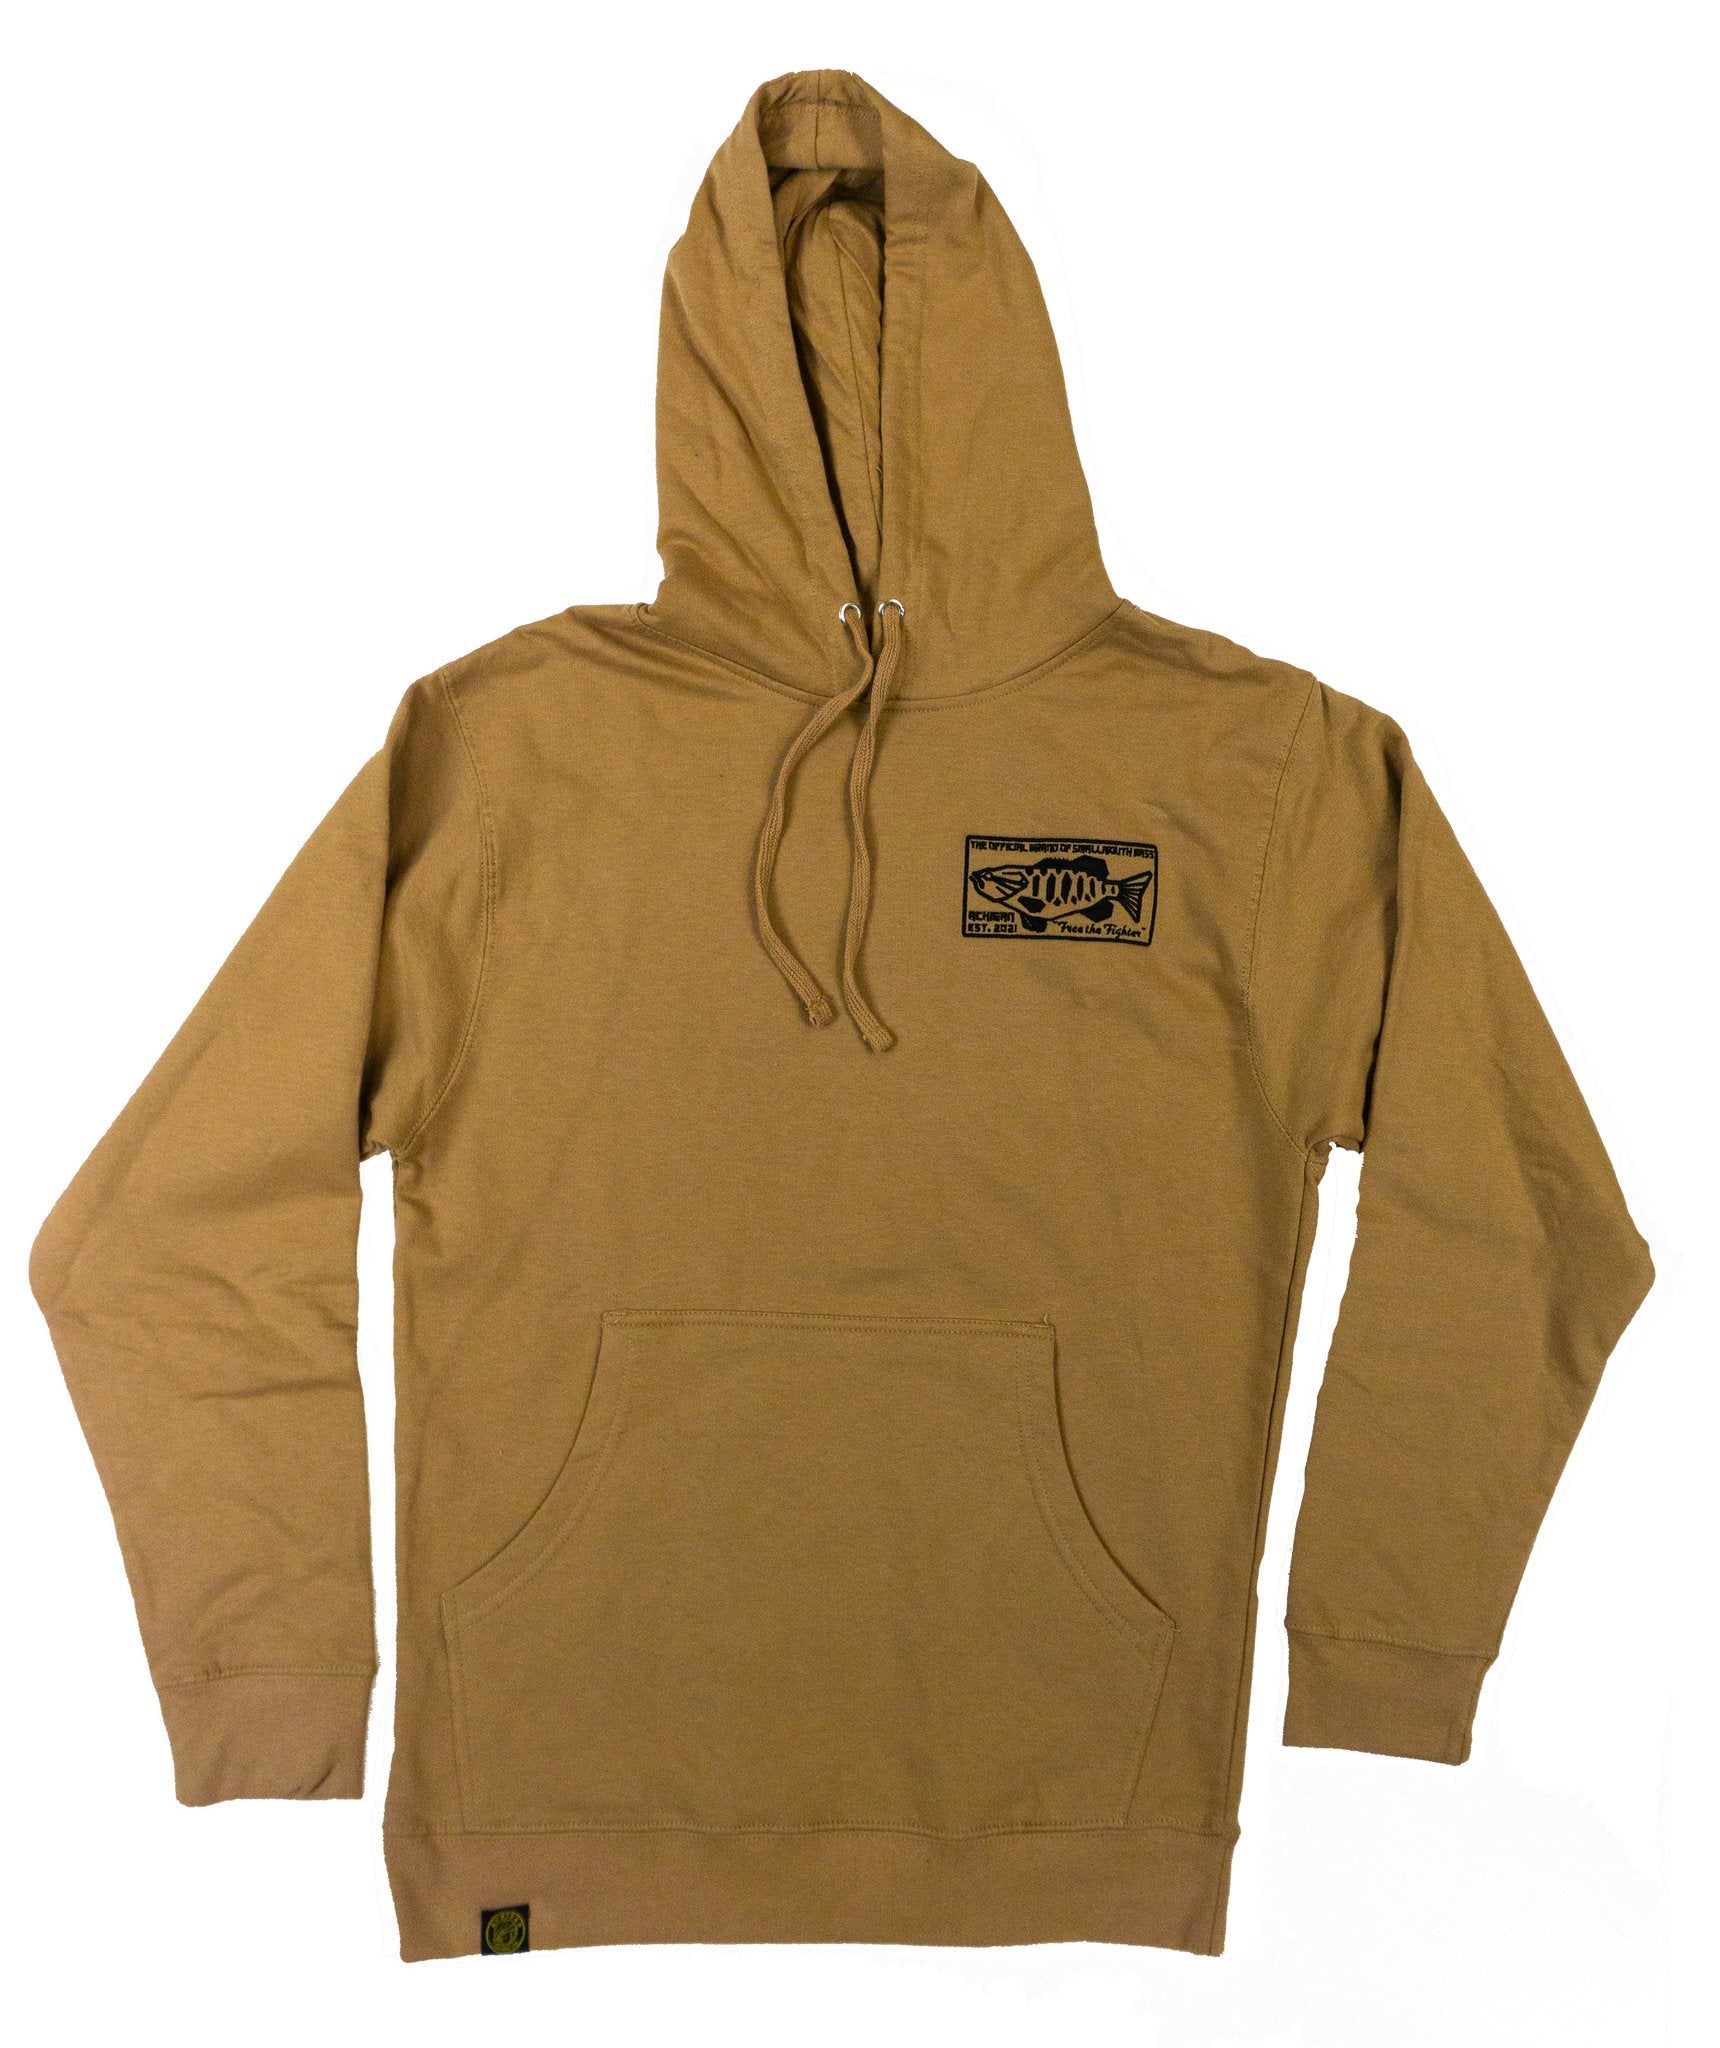 Achigan Free the Fighter Embroidered Hoodie Sand/Black - Hamilton Bait and Tackle